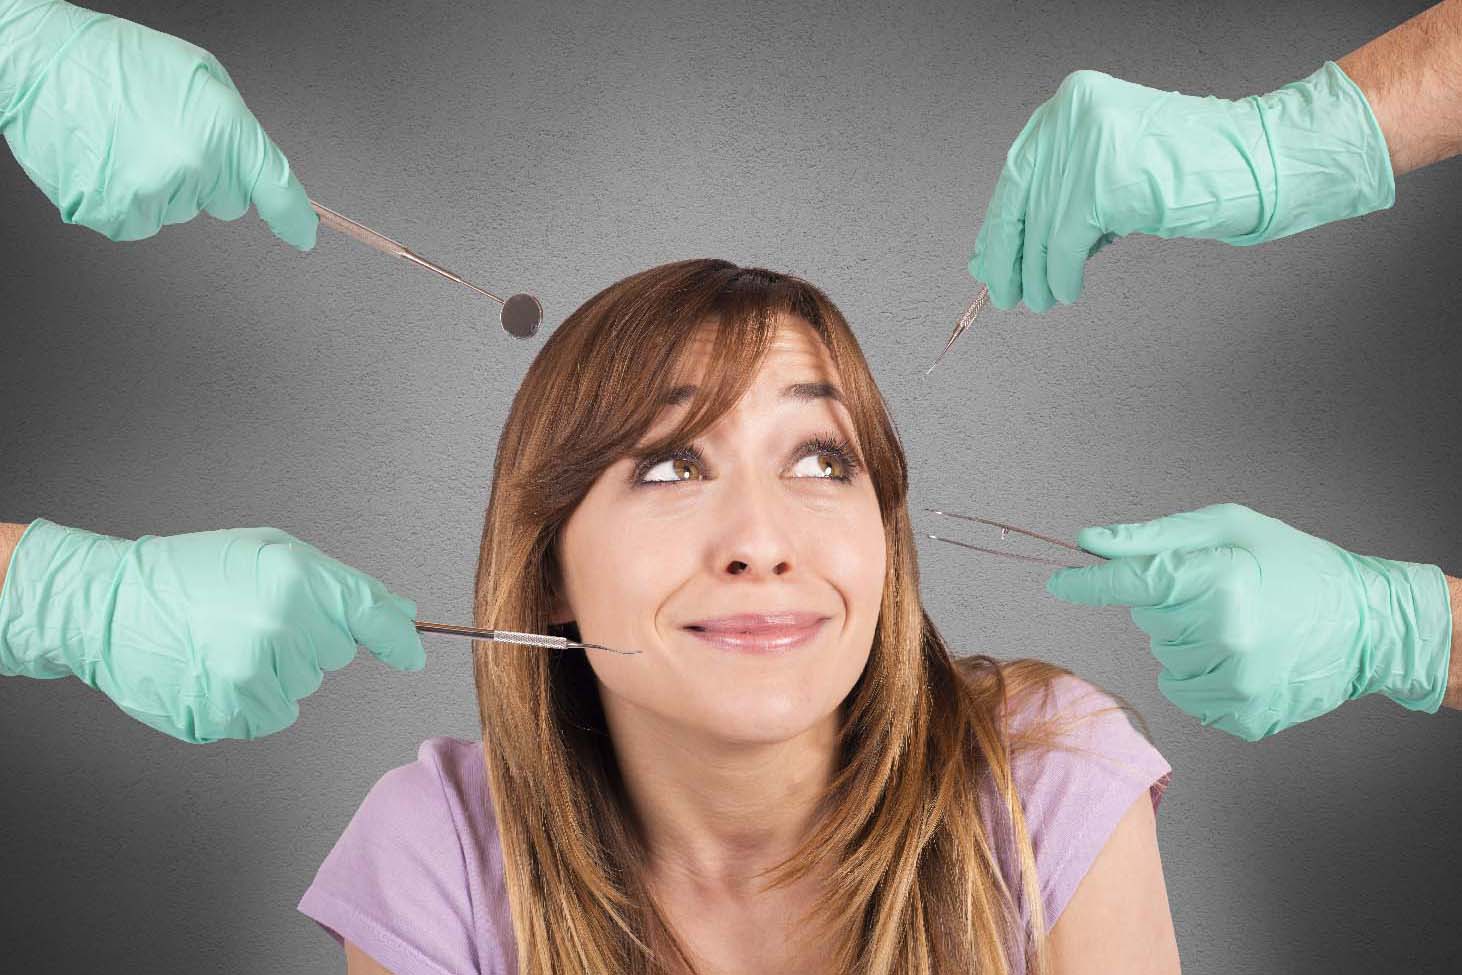 Woman surrounded by dental instruments looking afraid